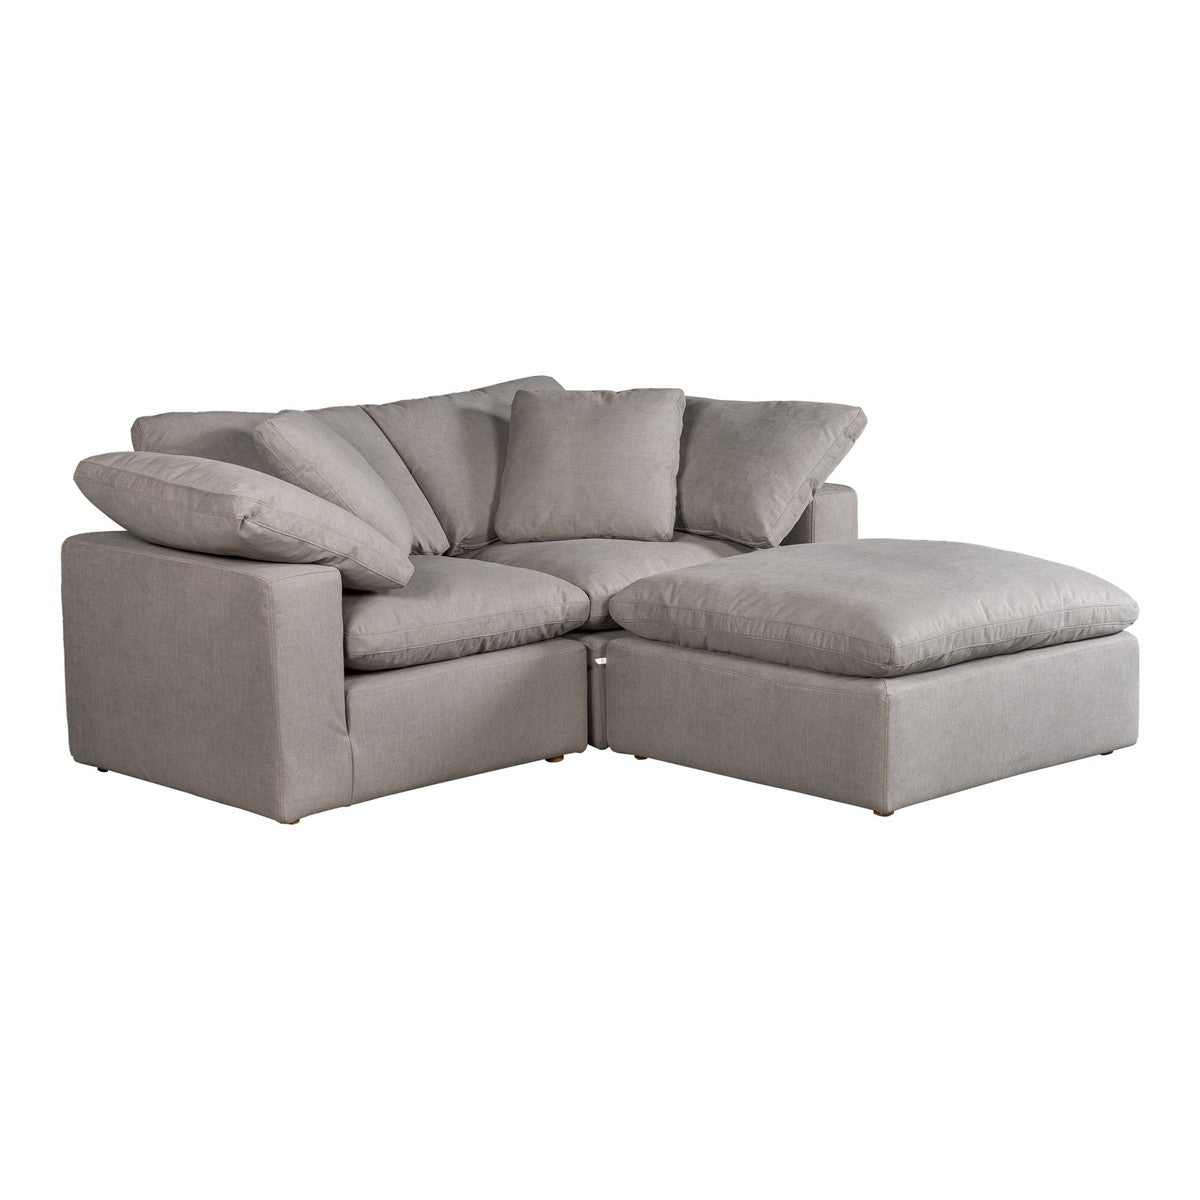 Moe's Home Collection Clay Nook Modular Sectional Livesmart Fabric Light Grey - YJ-1009-29